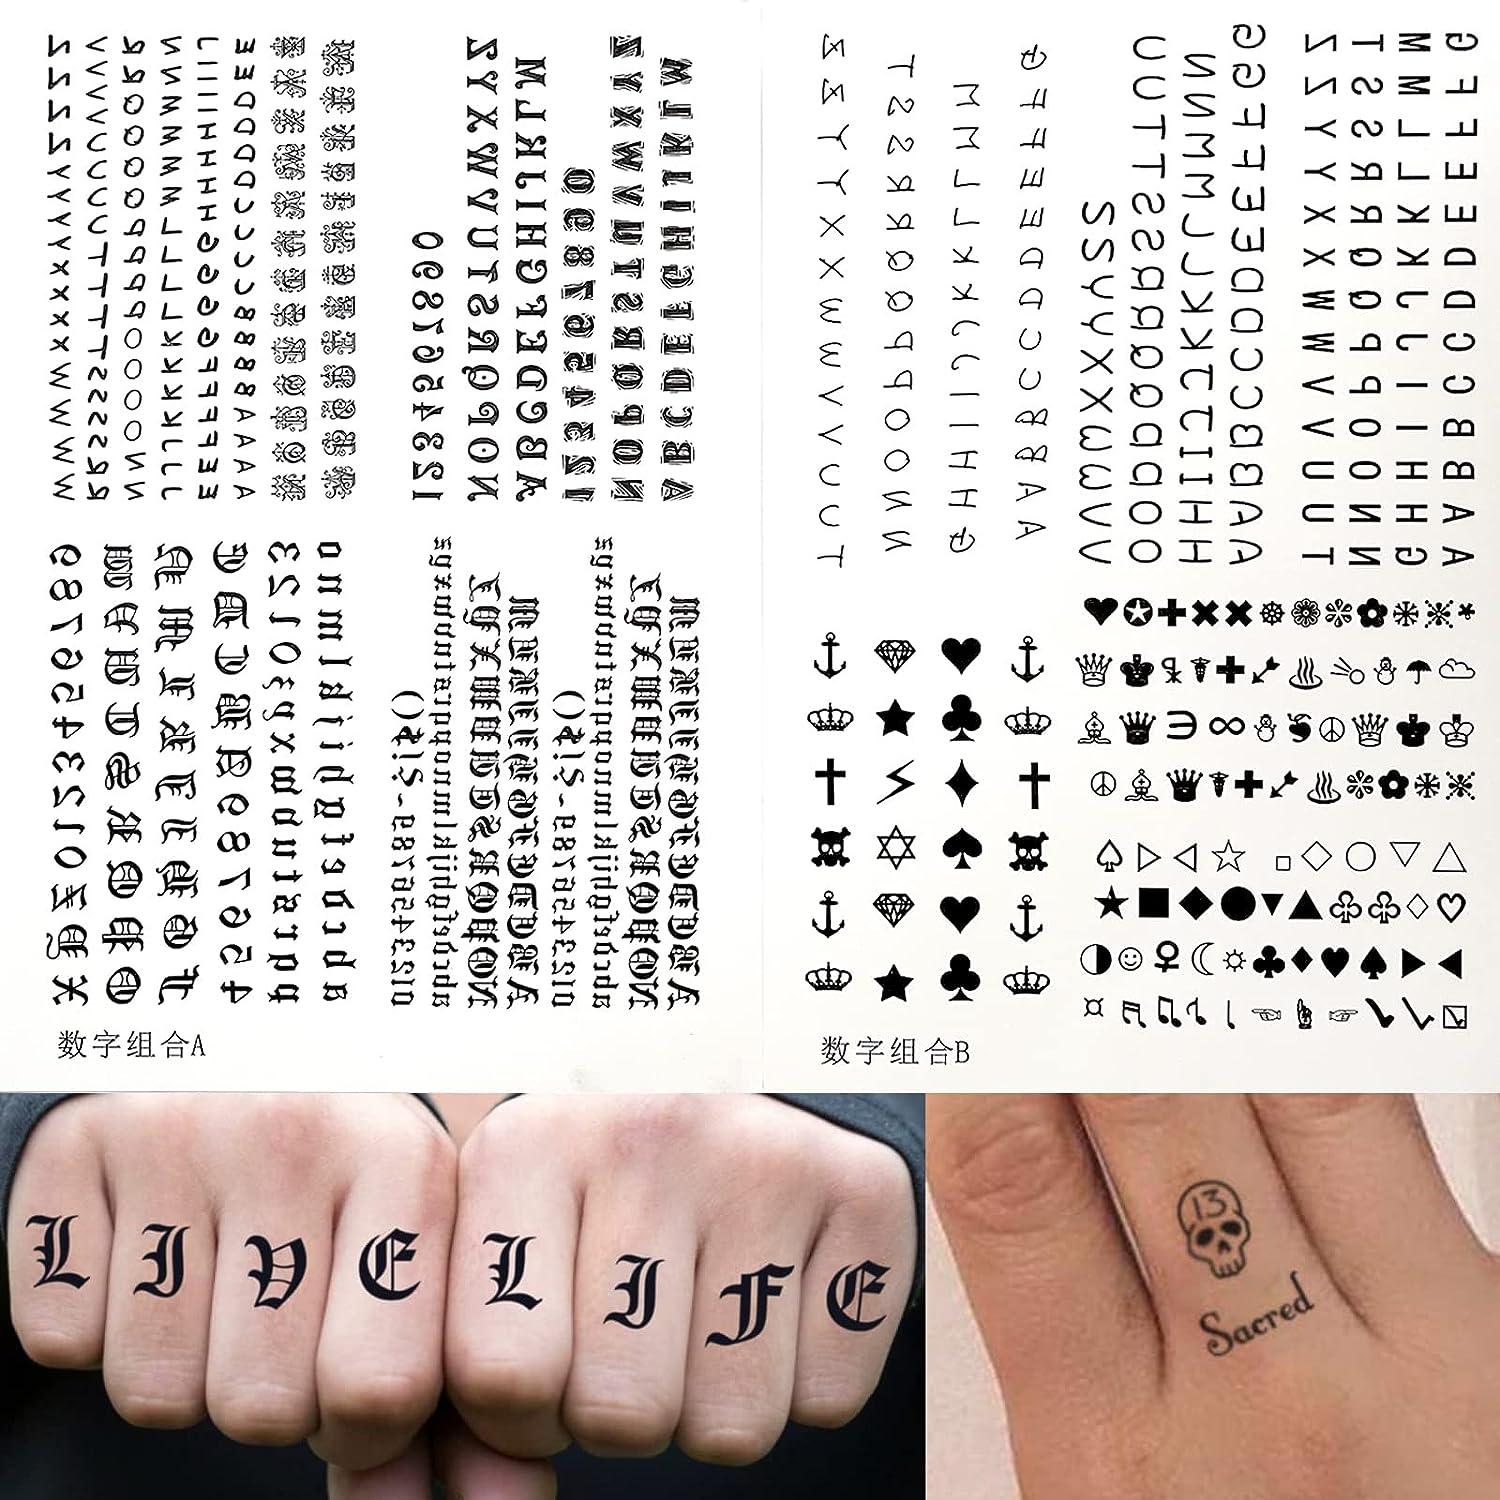 Temporary Tattoos For Men, Women, And Kids DIY Love Believe Fake Tattoos  From Soapsane, $5.08 | DHgate.Com